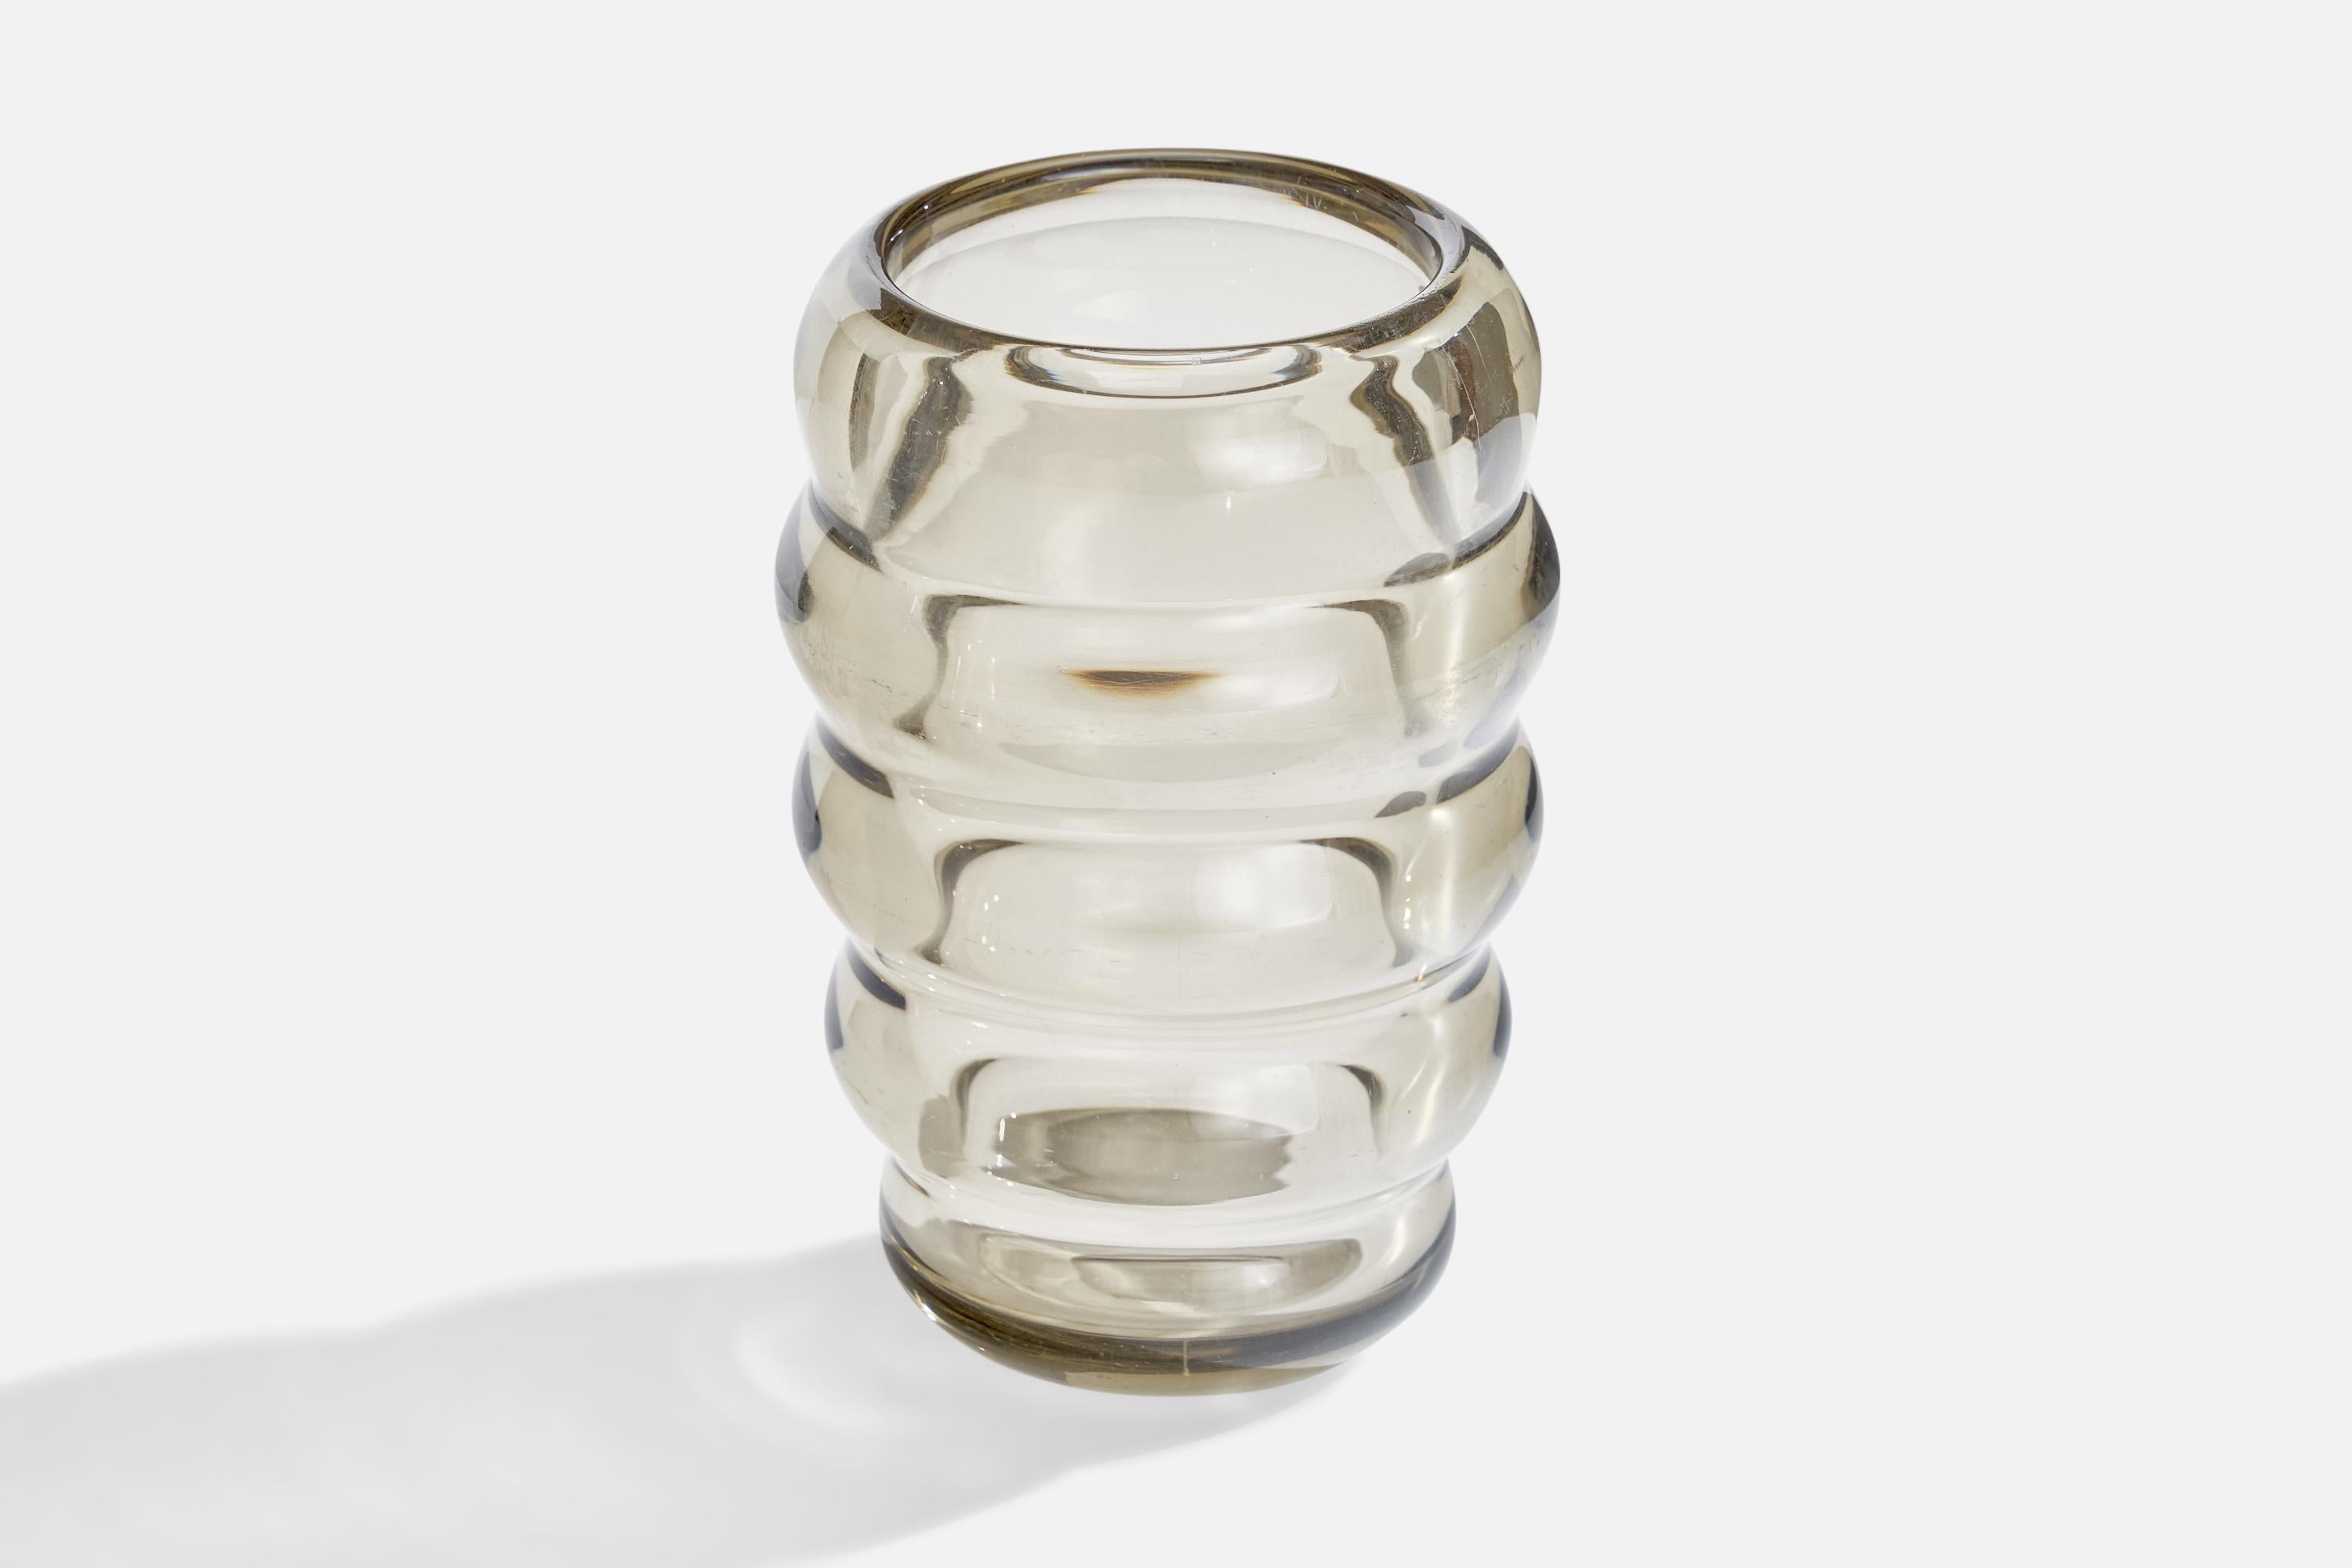 A smoked glass vase designed and produced by Riihimäen Lasi, Finland, 1930s.